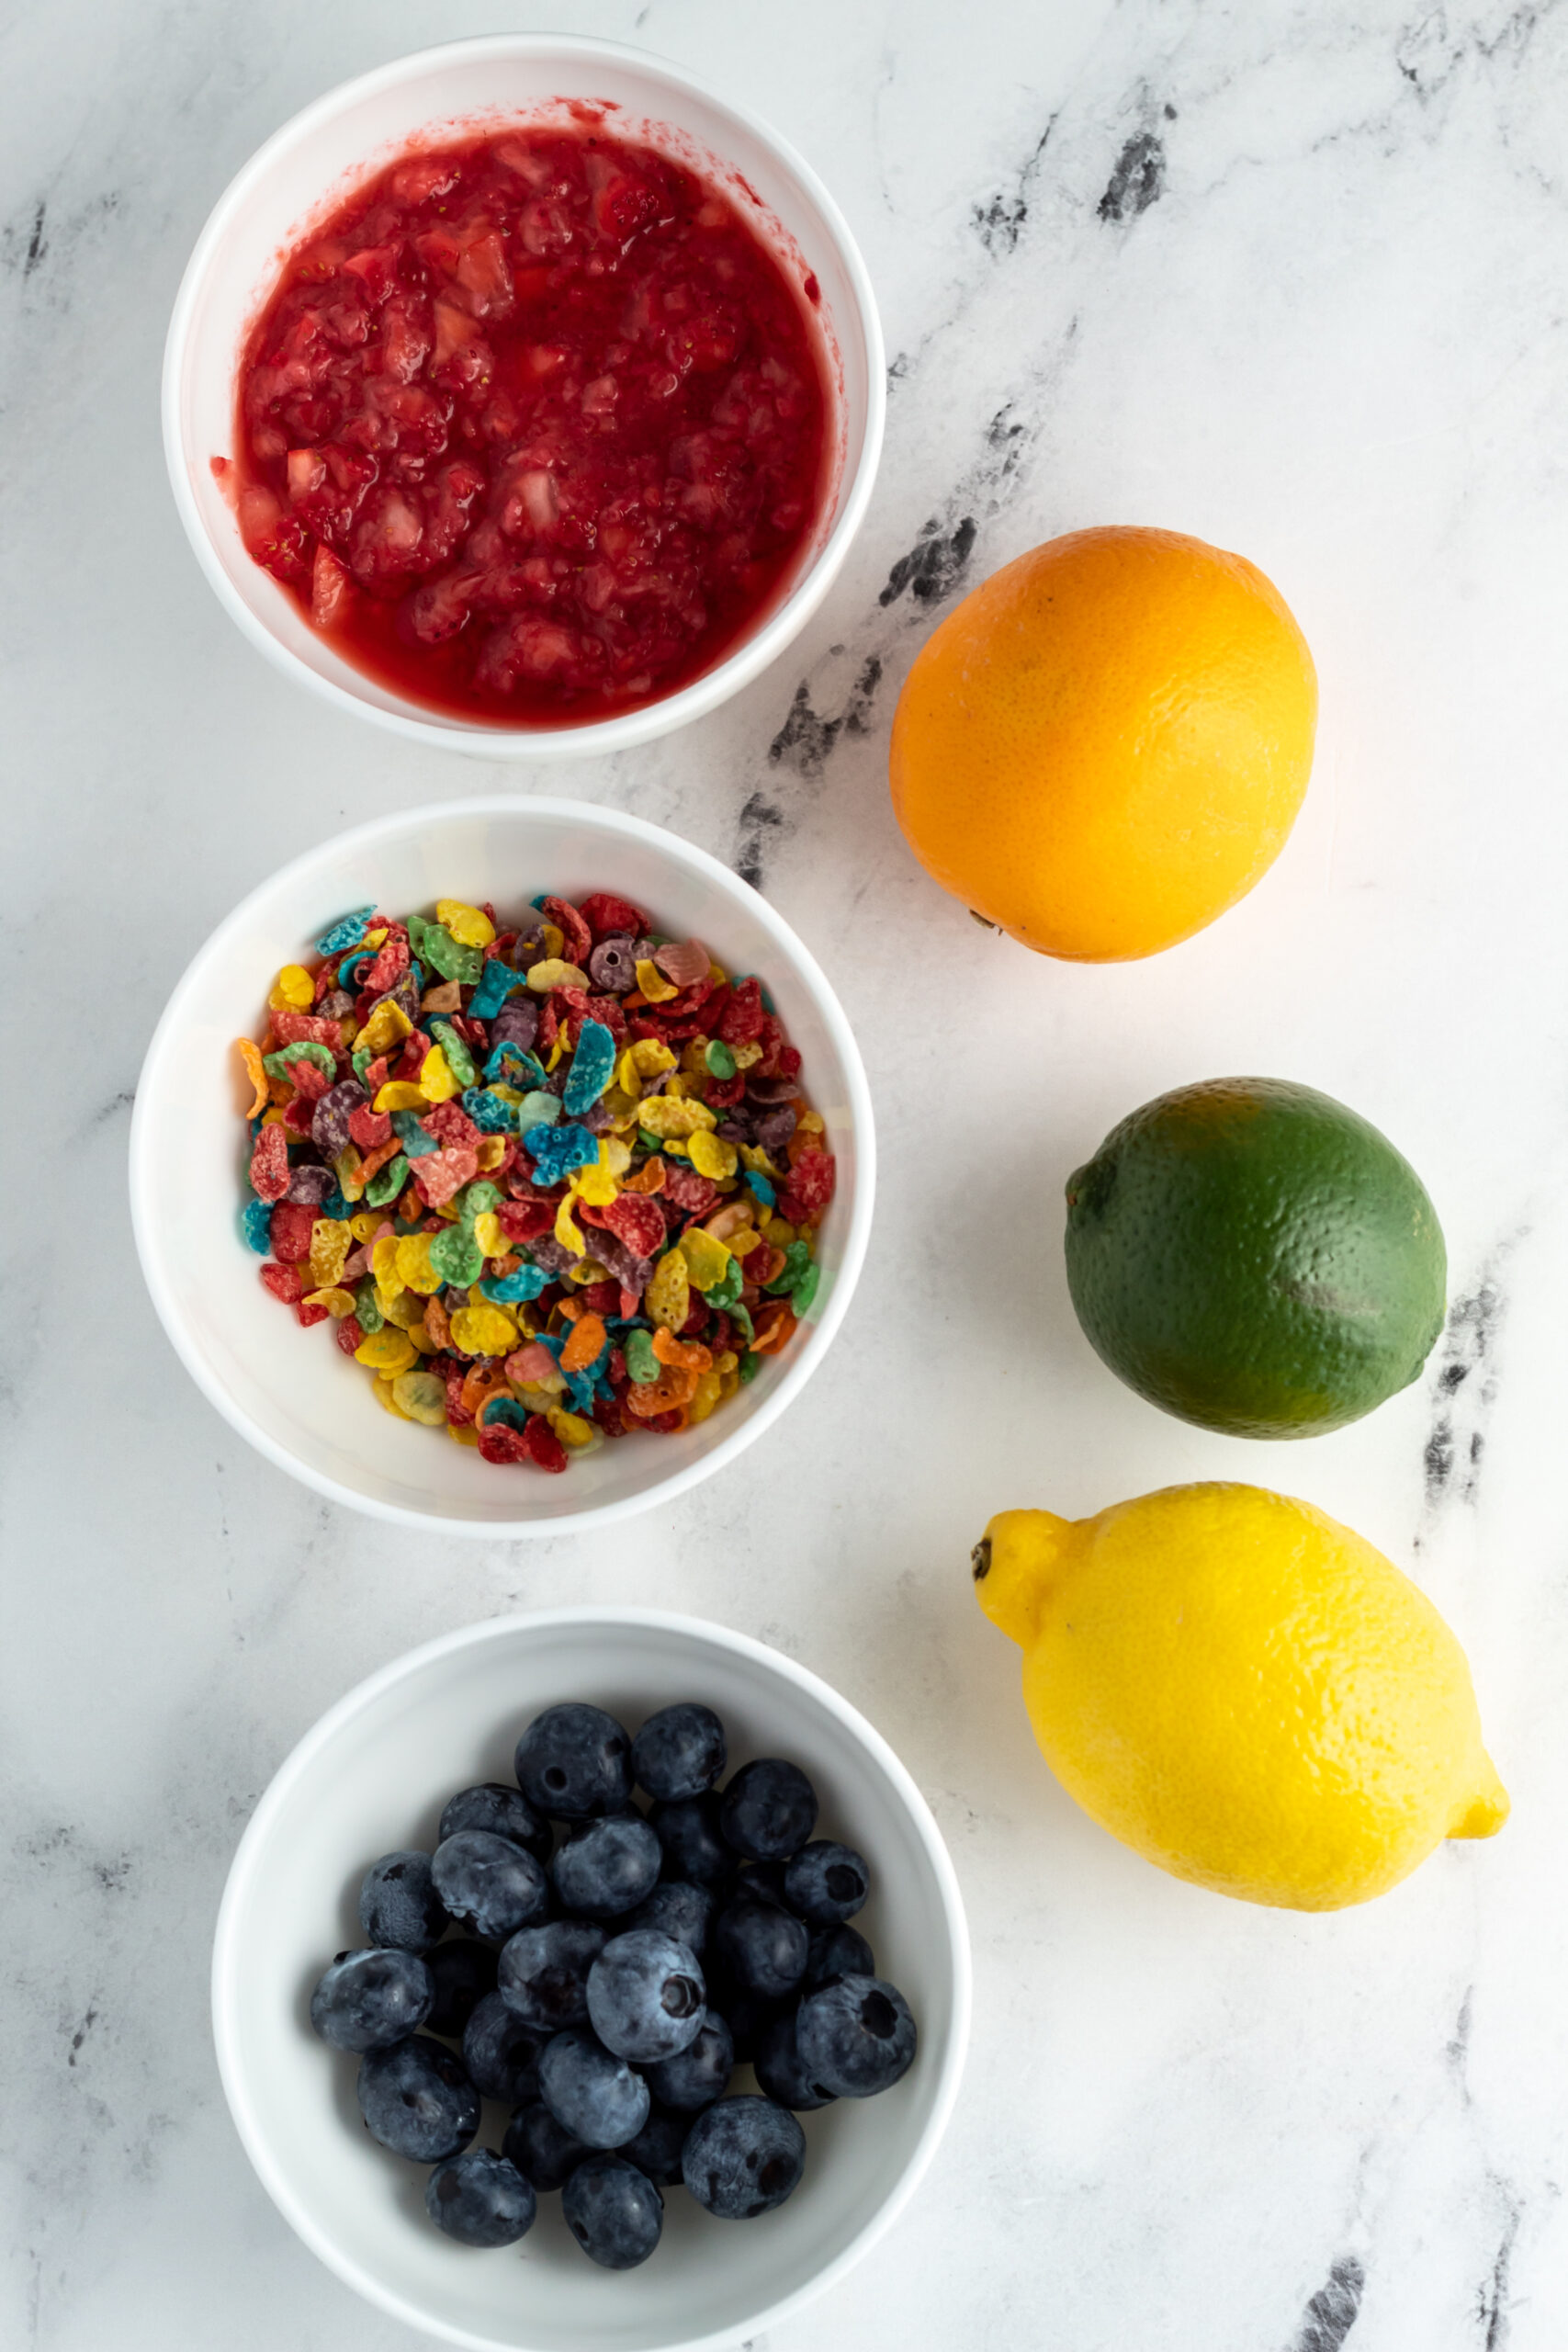 Fruity Pebbles cereal, bowls of strawberries and blueberries and citrus fruit.